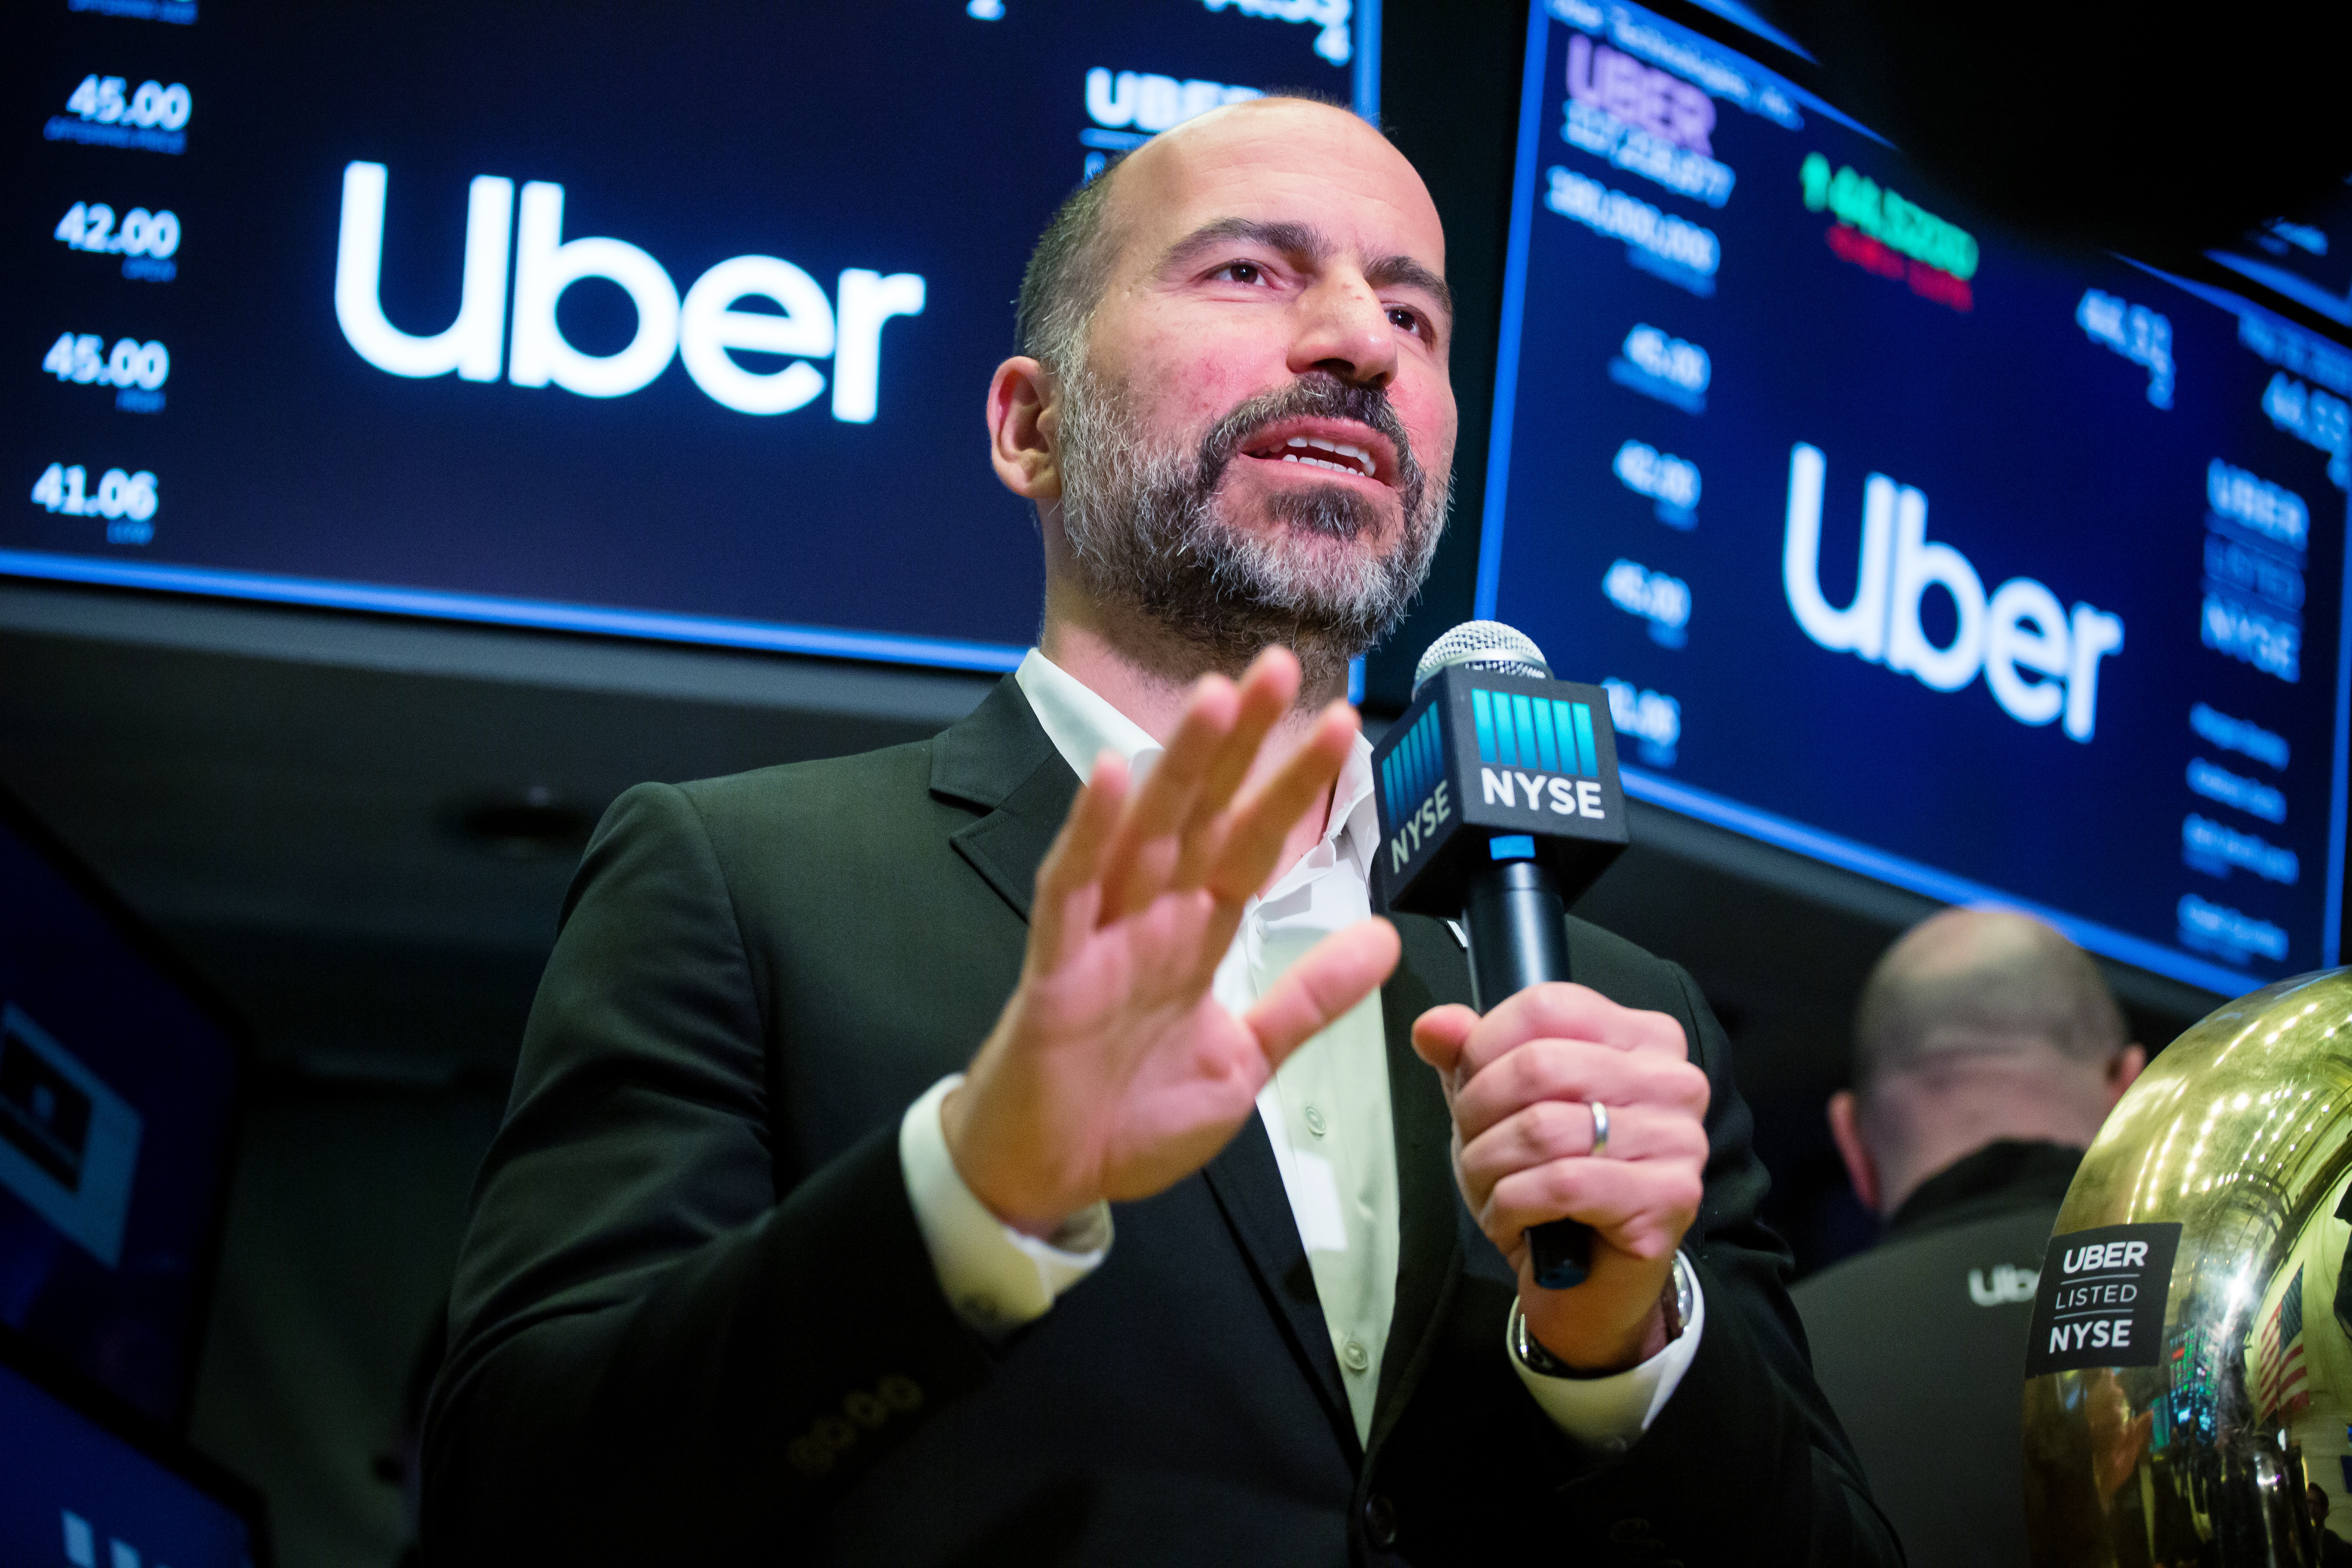 Uber suffers disappointing stock market debut | Ars Technica